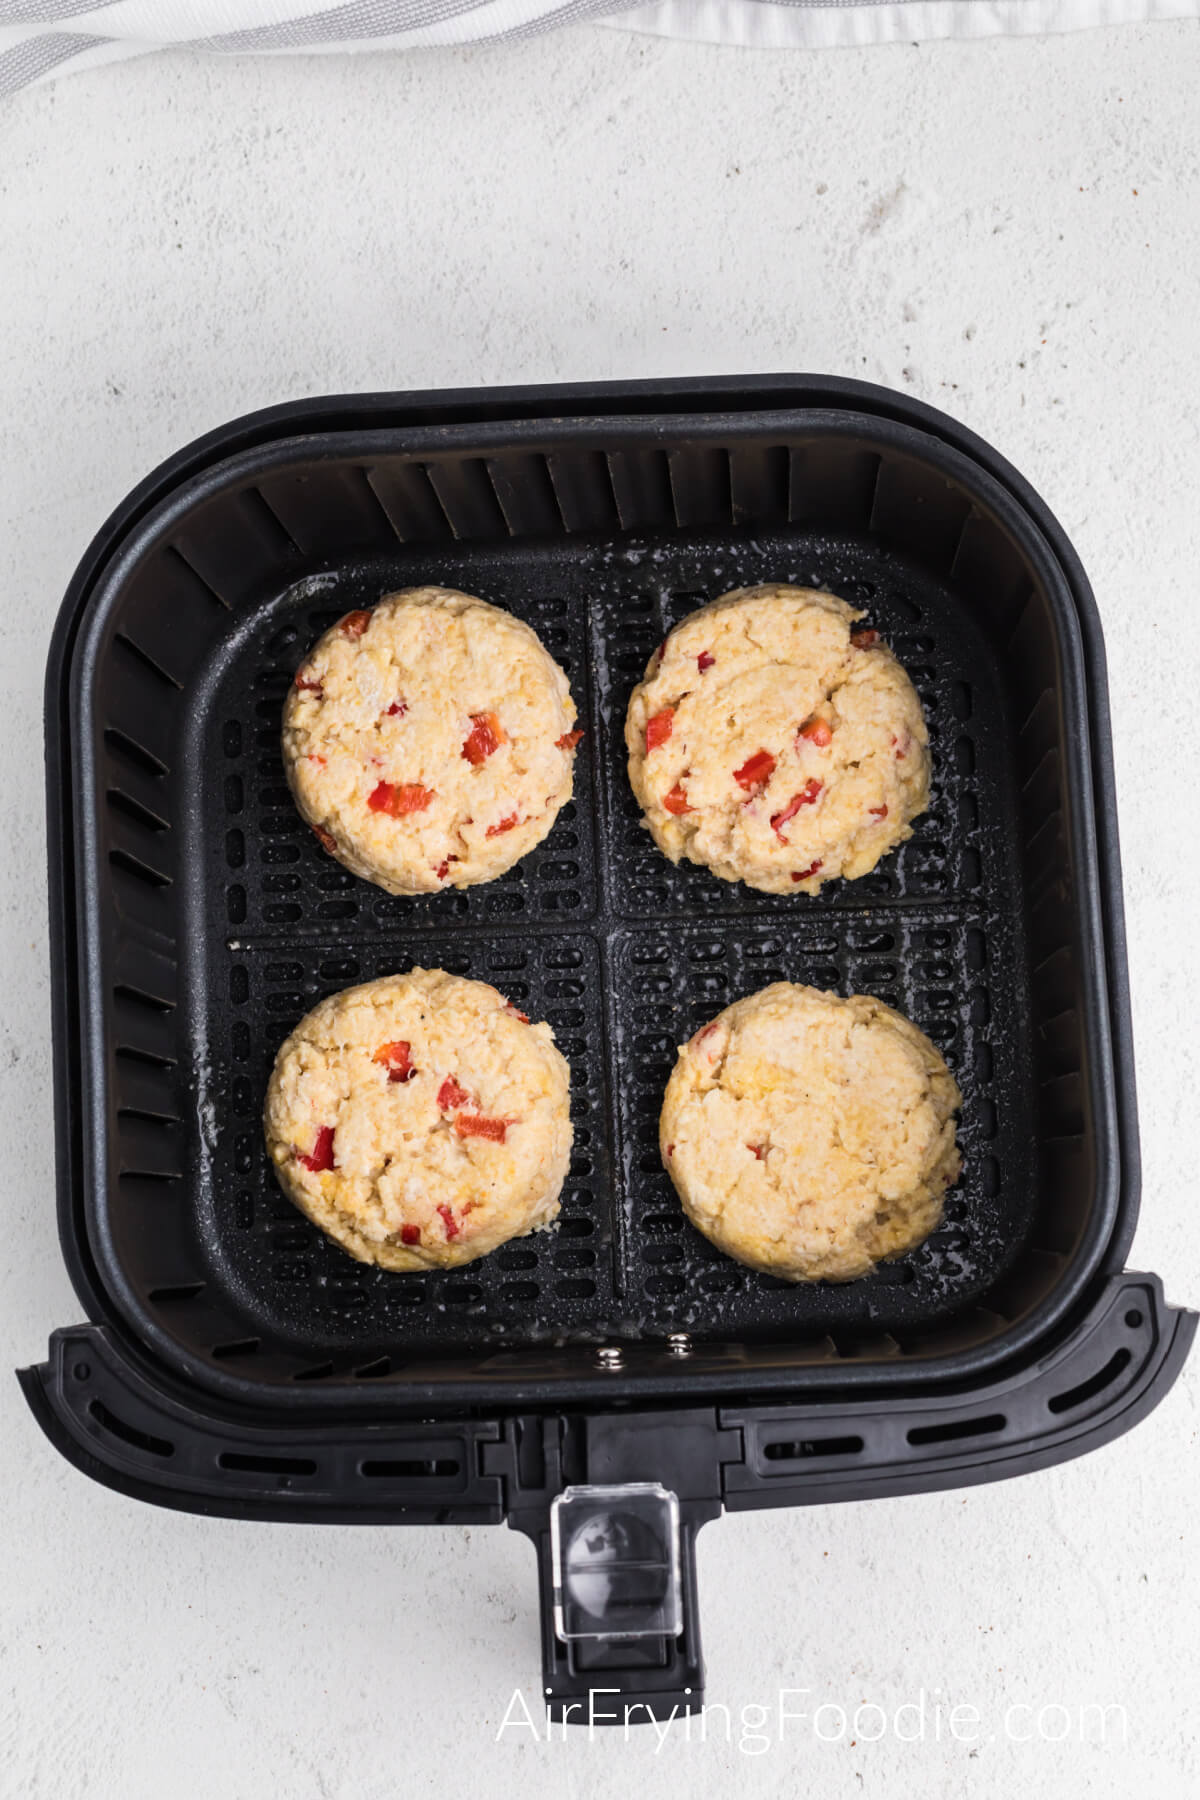 Crab cakes in the basket of the air fryer, ready to air fry. 